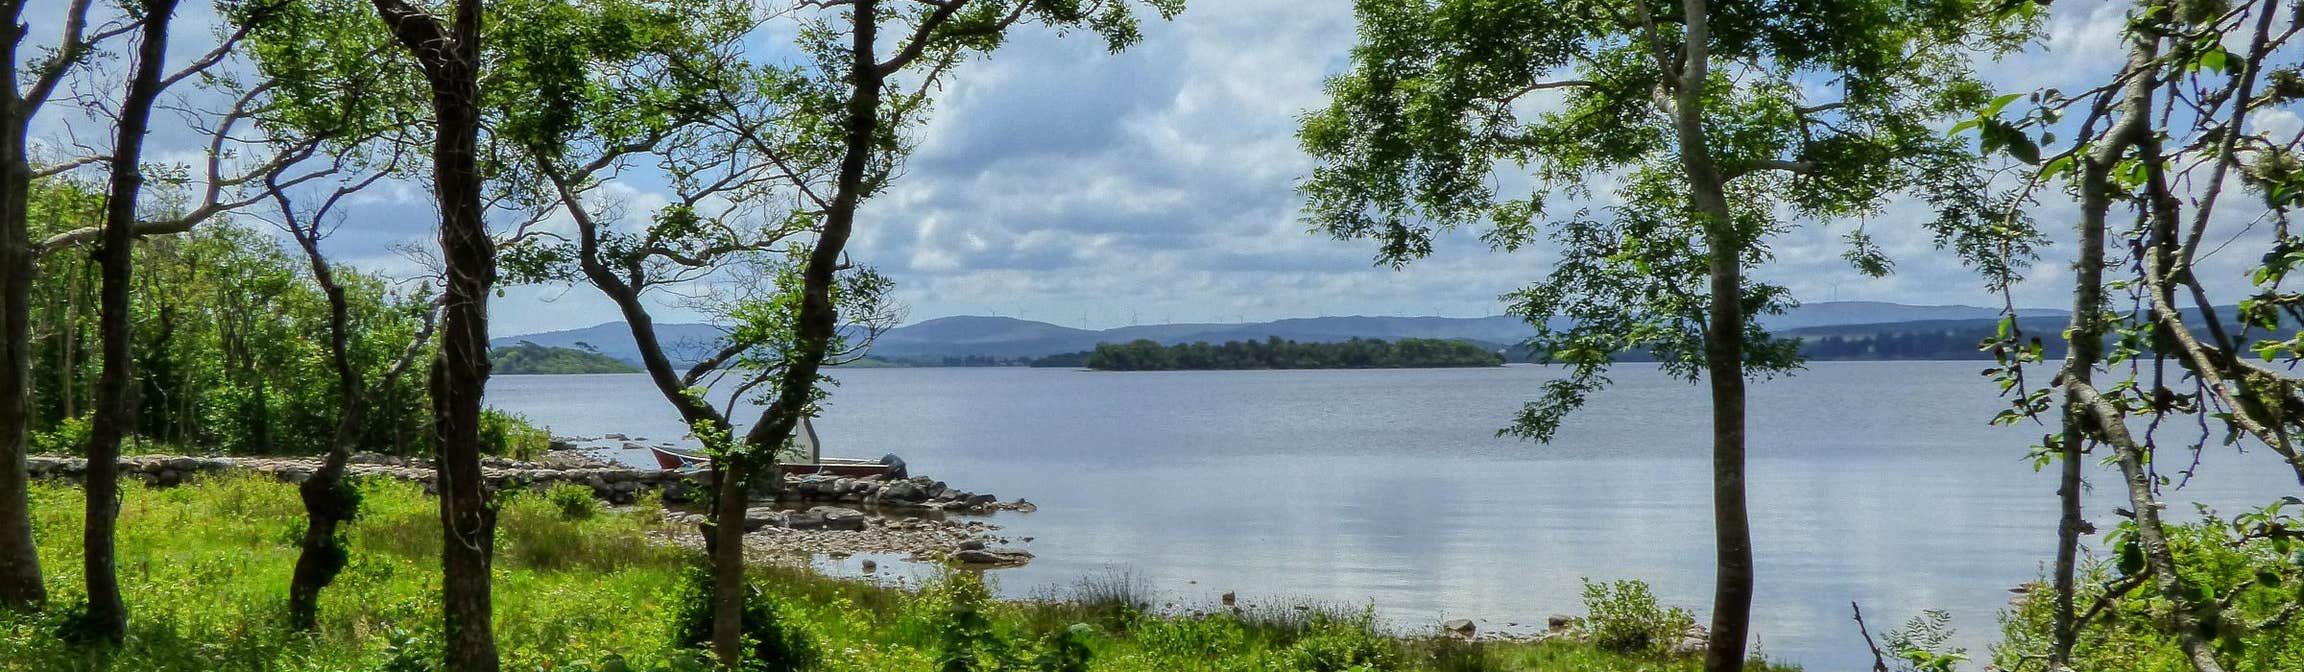 Image of Lough Corrib in County Galway